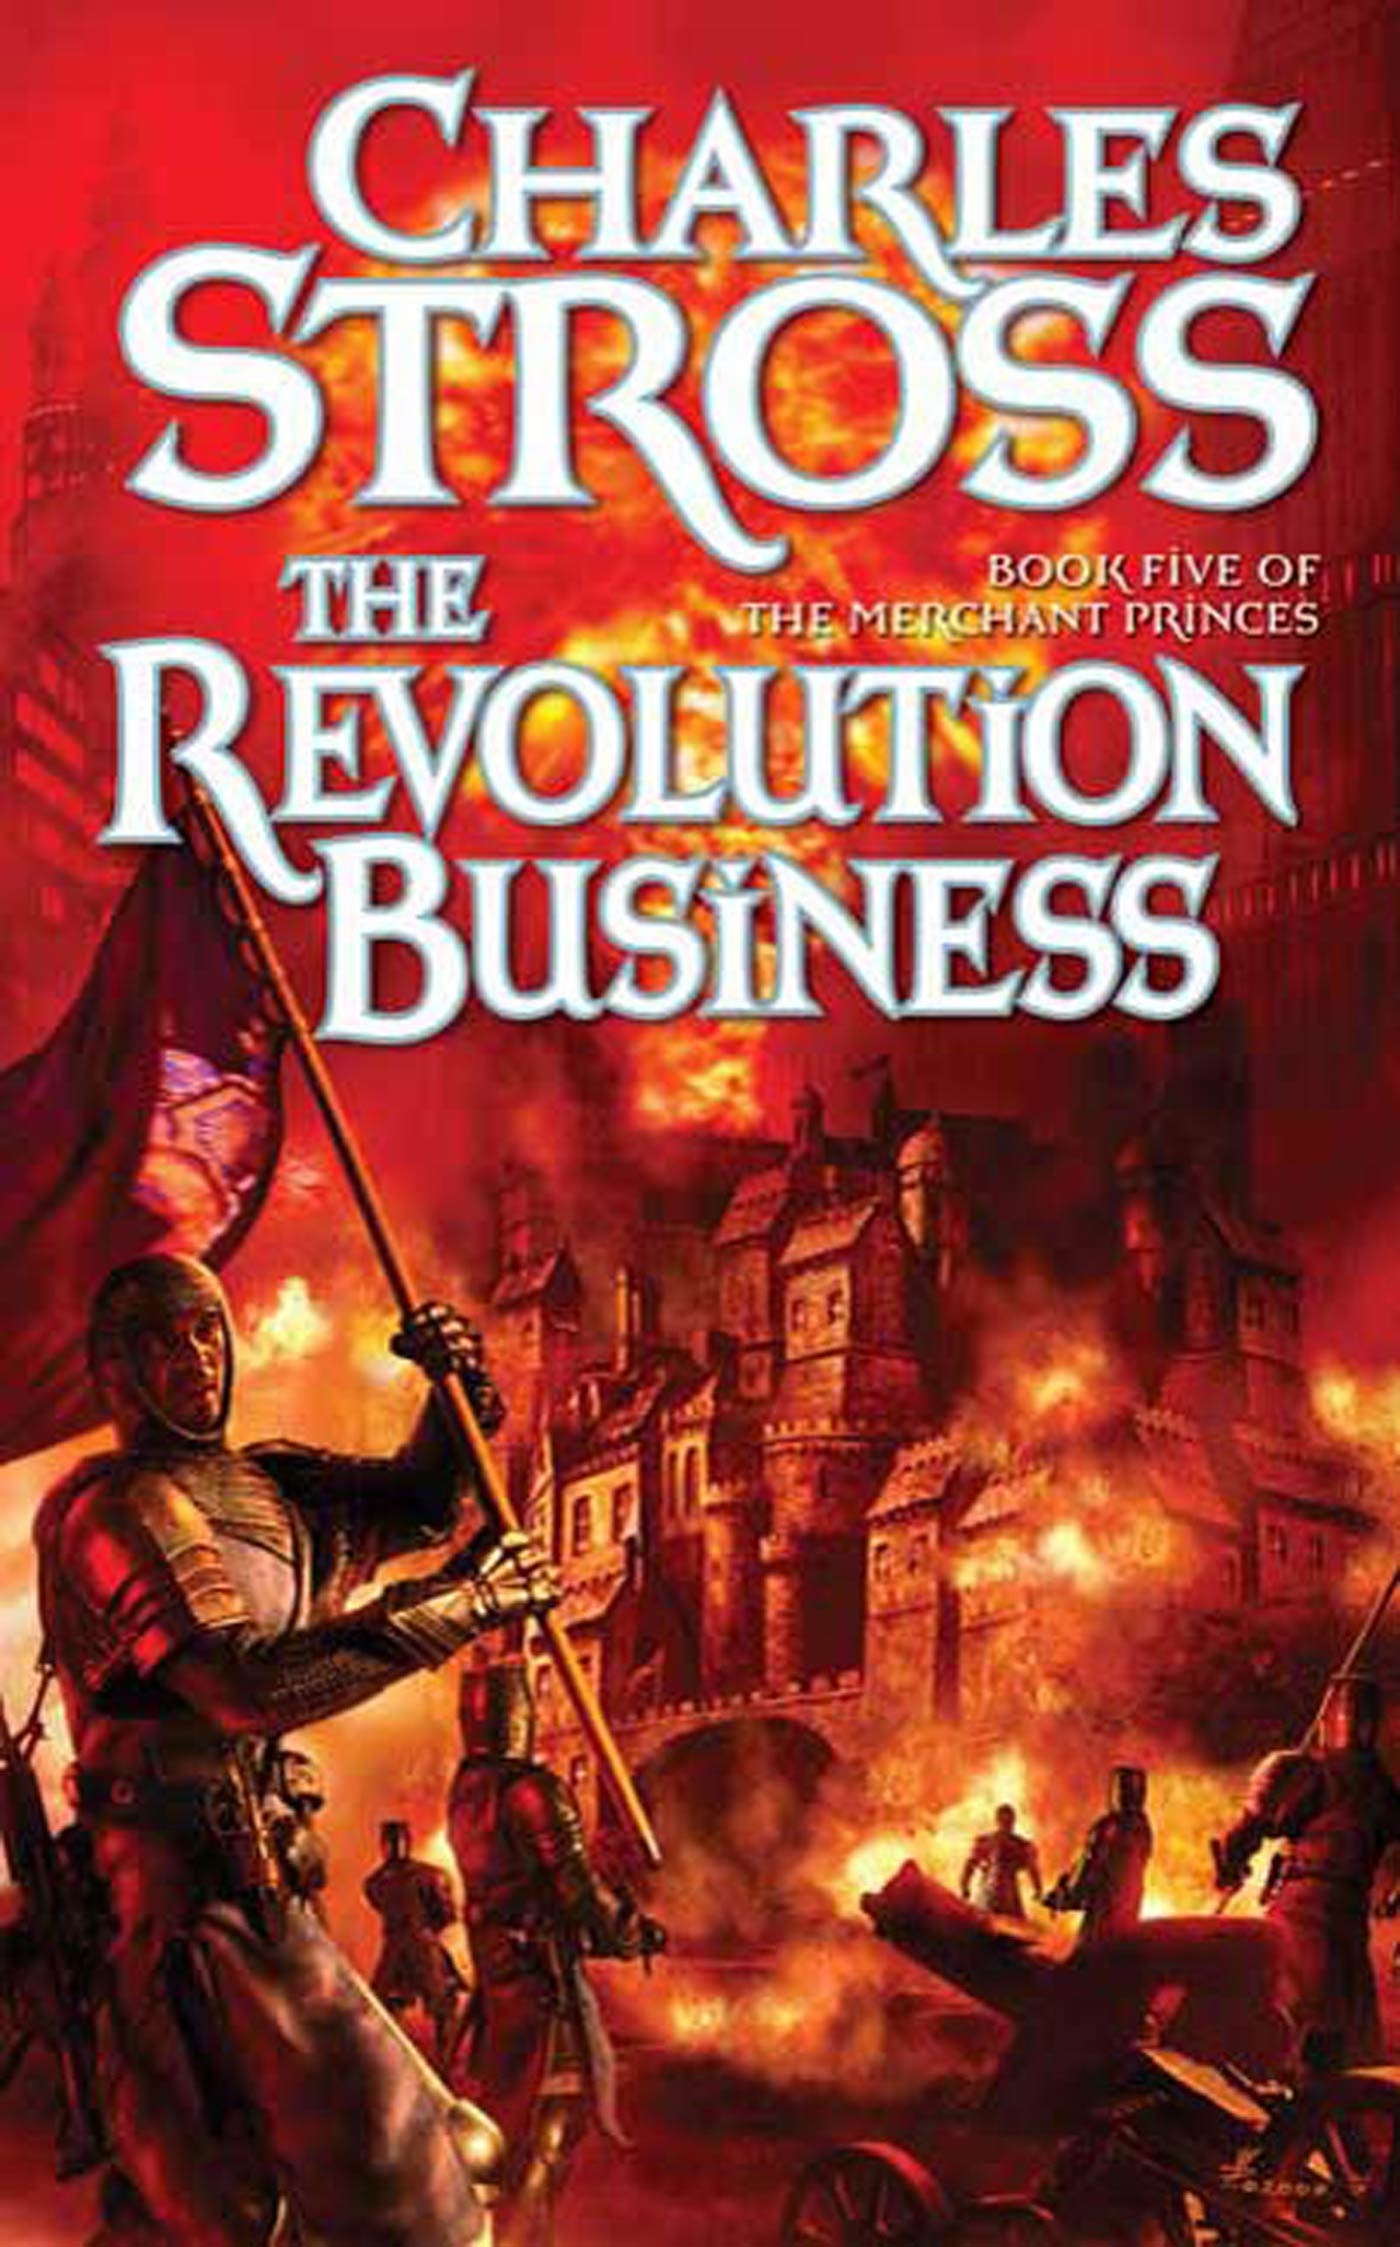 The Revolution Business : Book Five of the Merchant Princes by Charles Stross